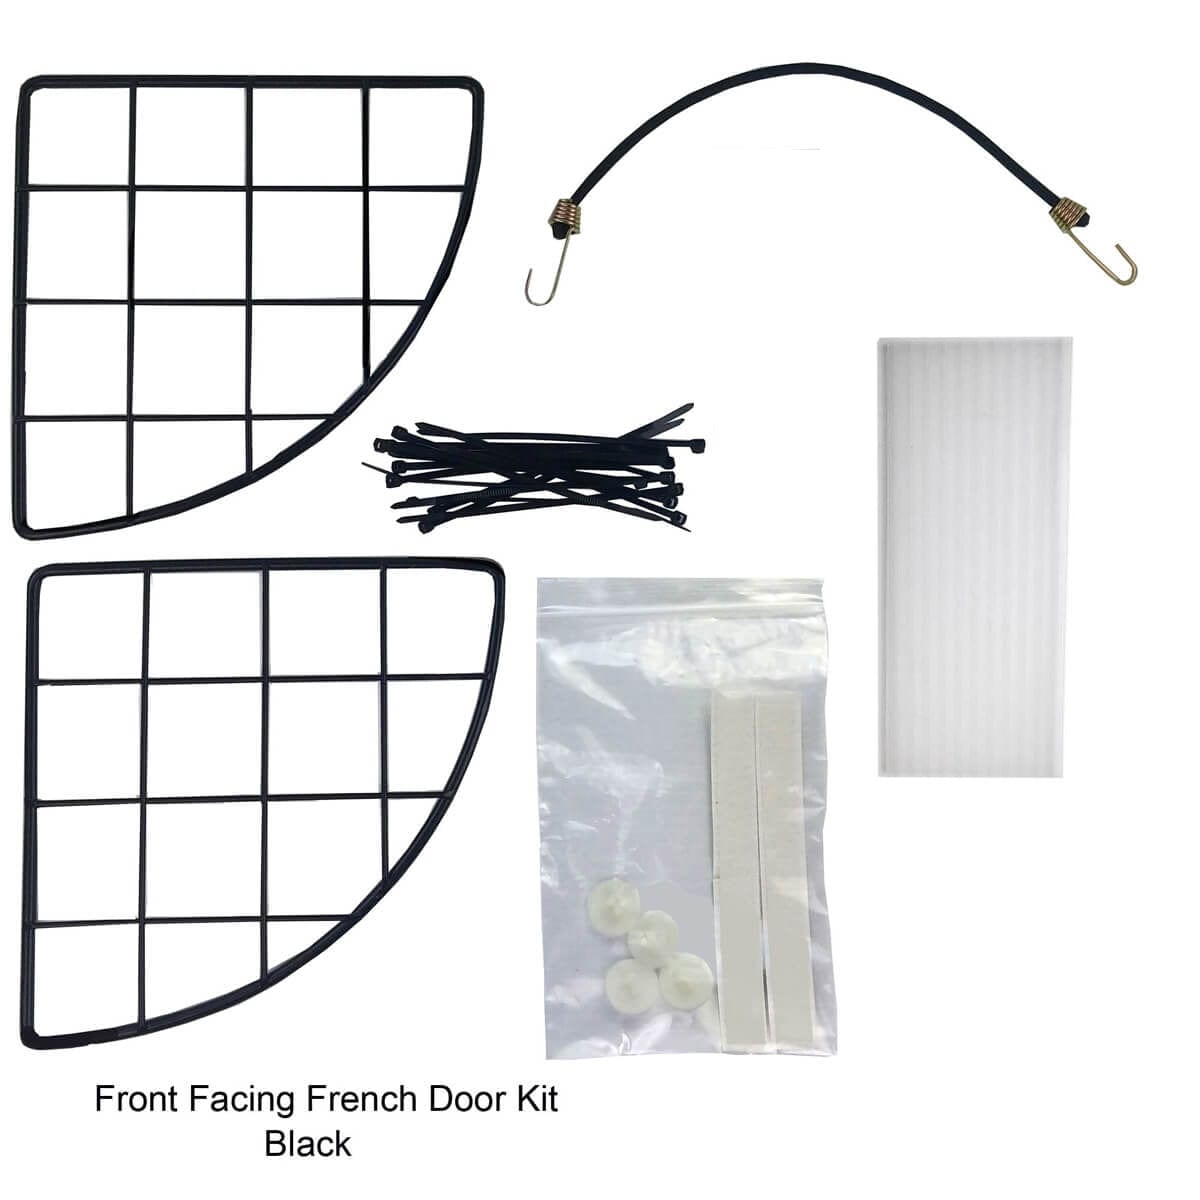 Components that make up a French Door Kit for a C&C guinea pig cage